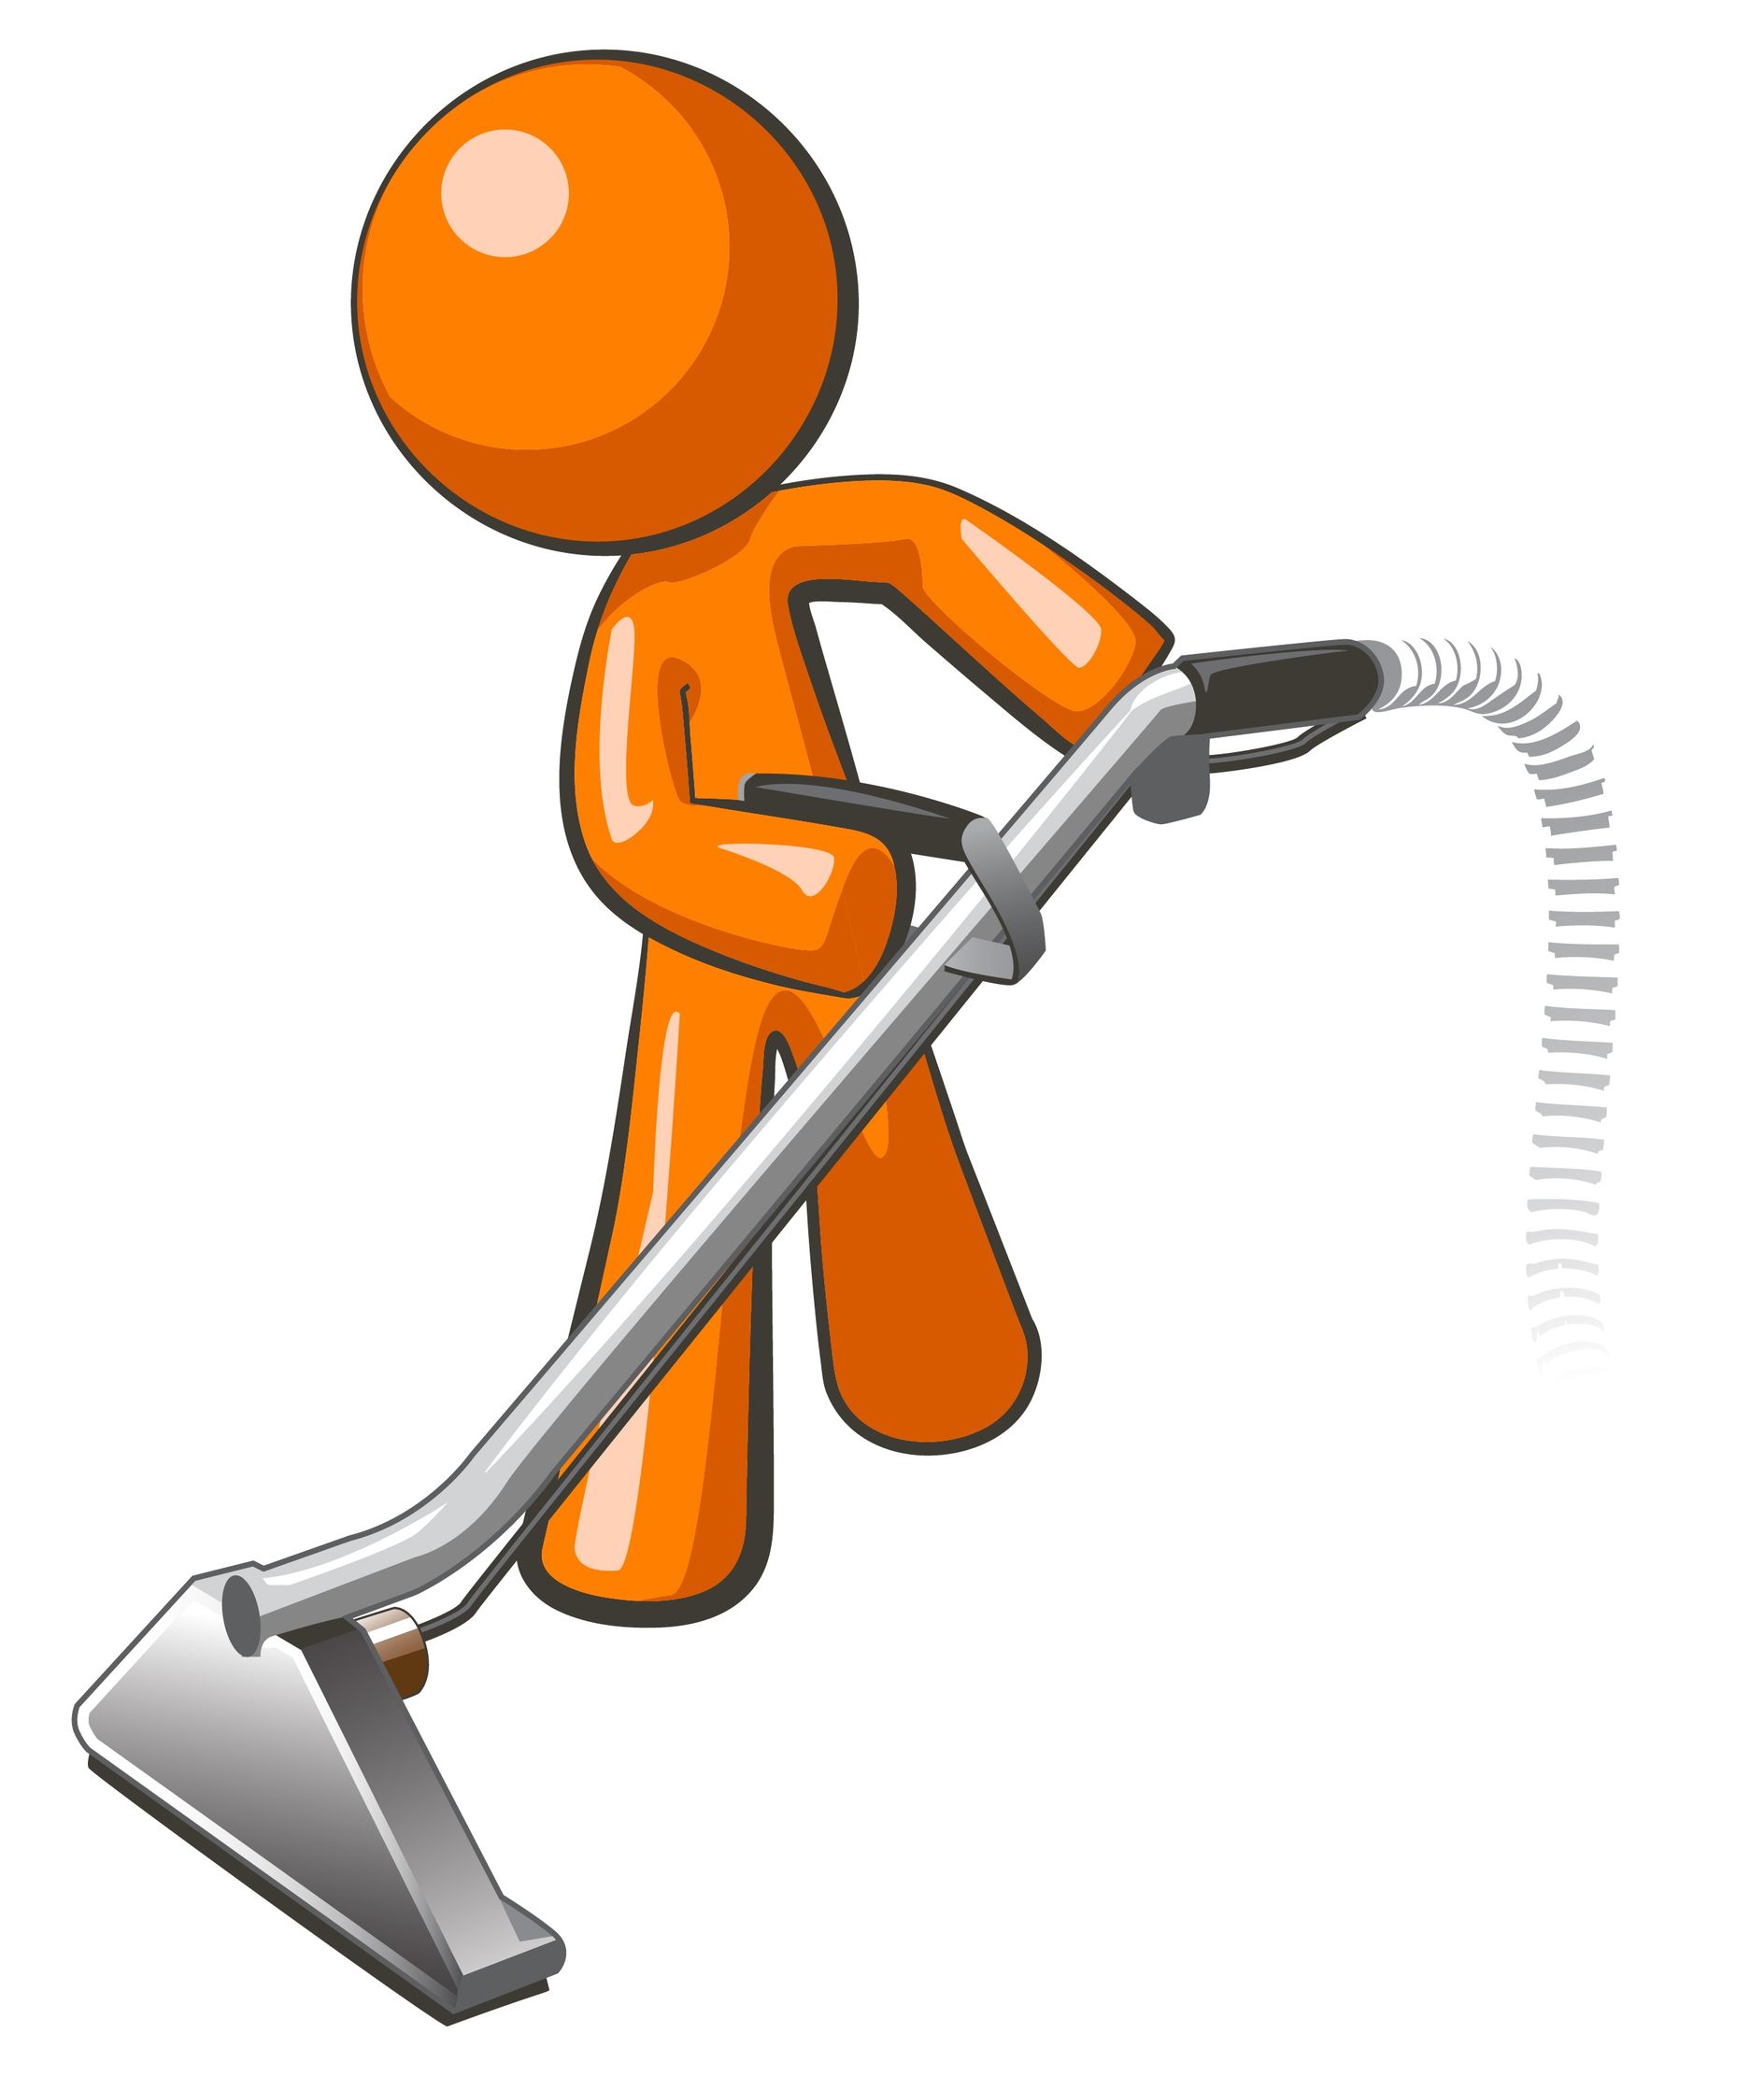 Janitorial Logos  Your Janitorial Business